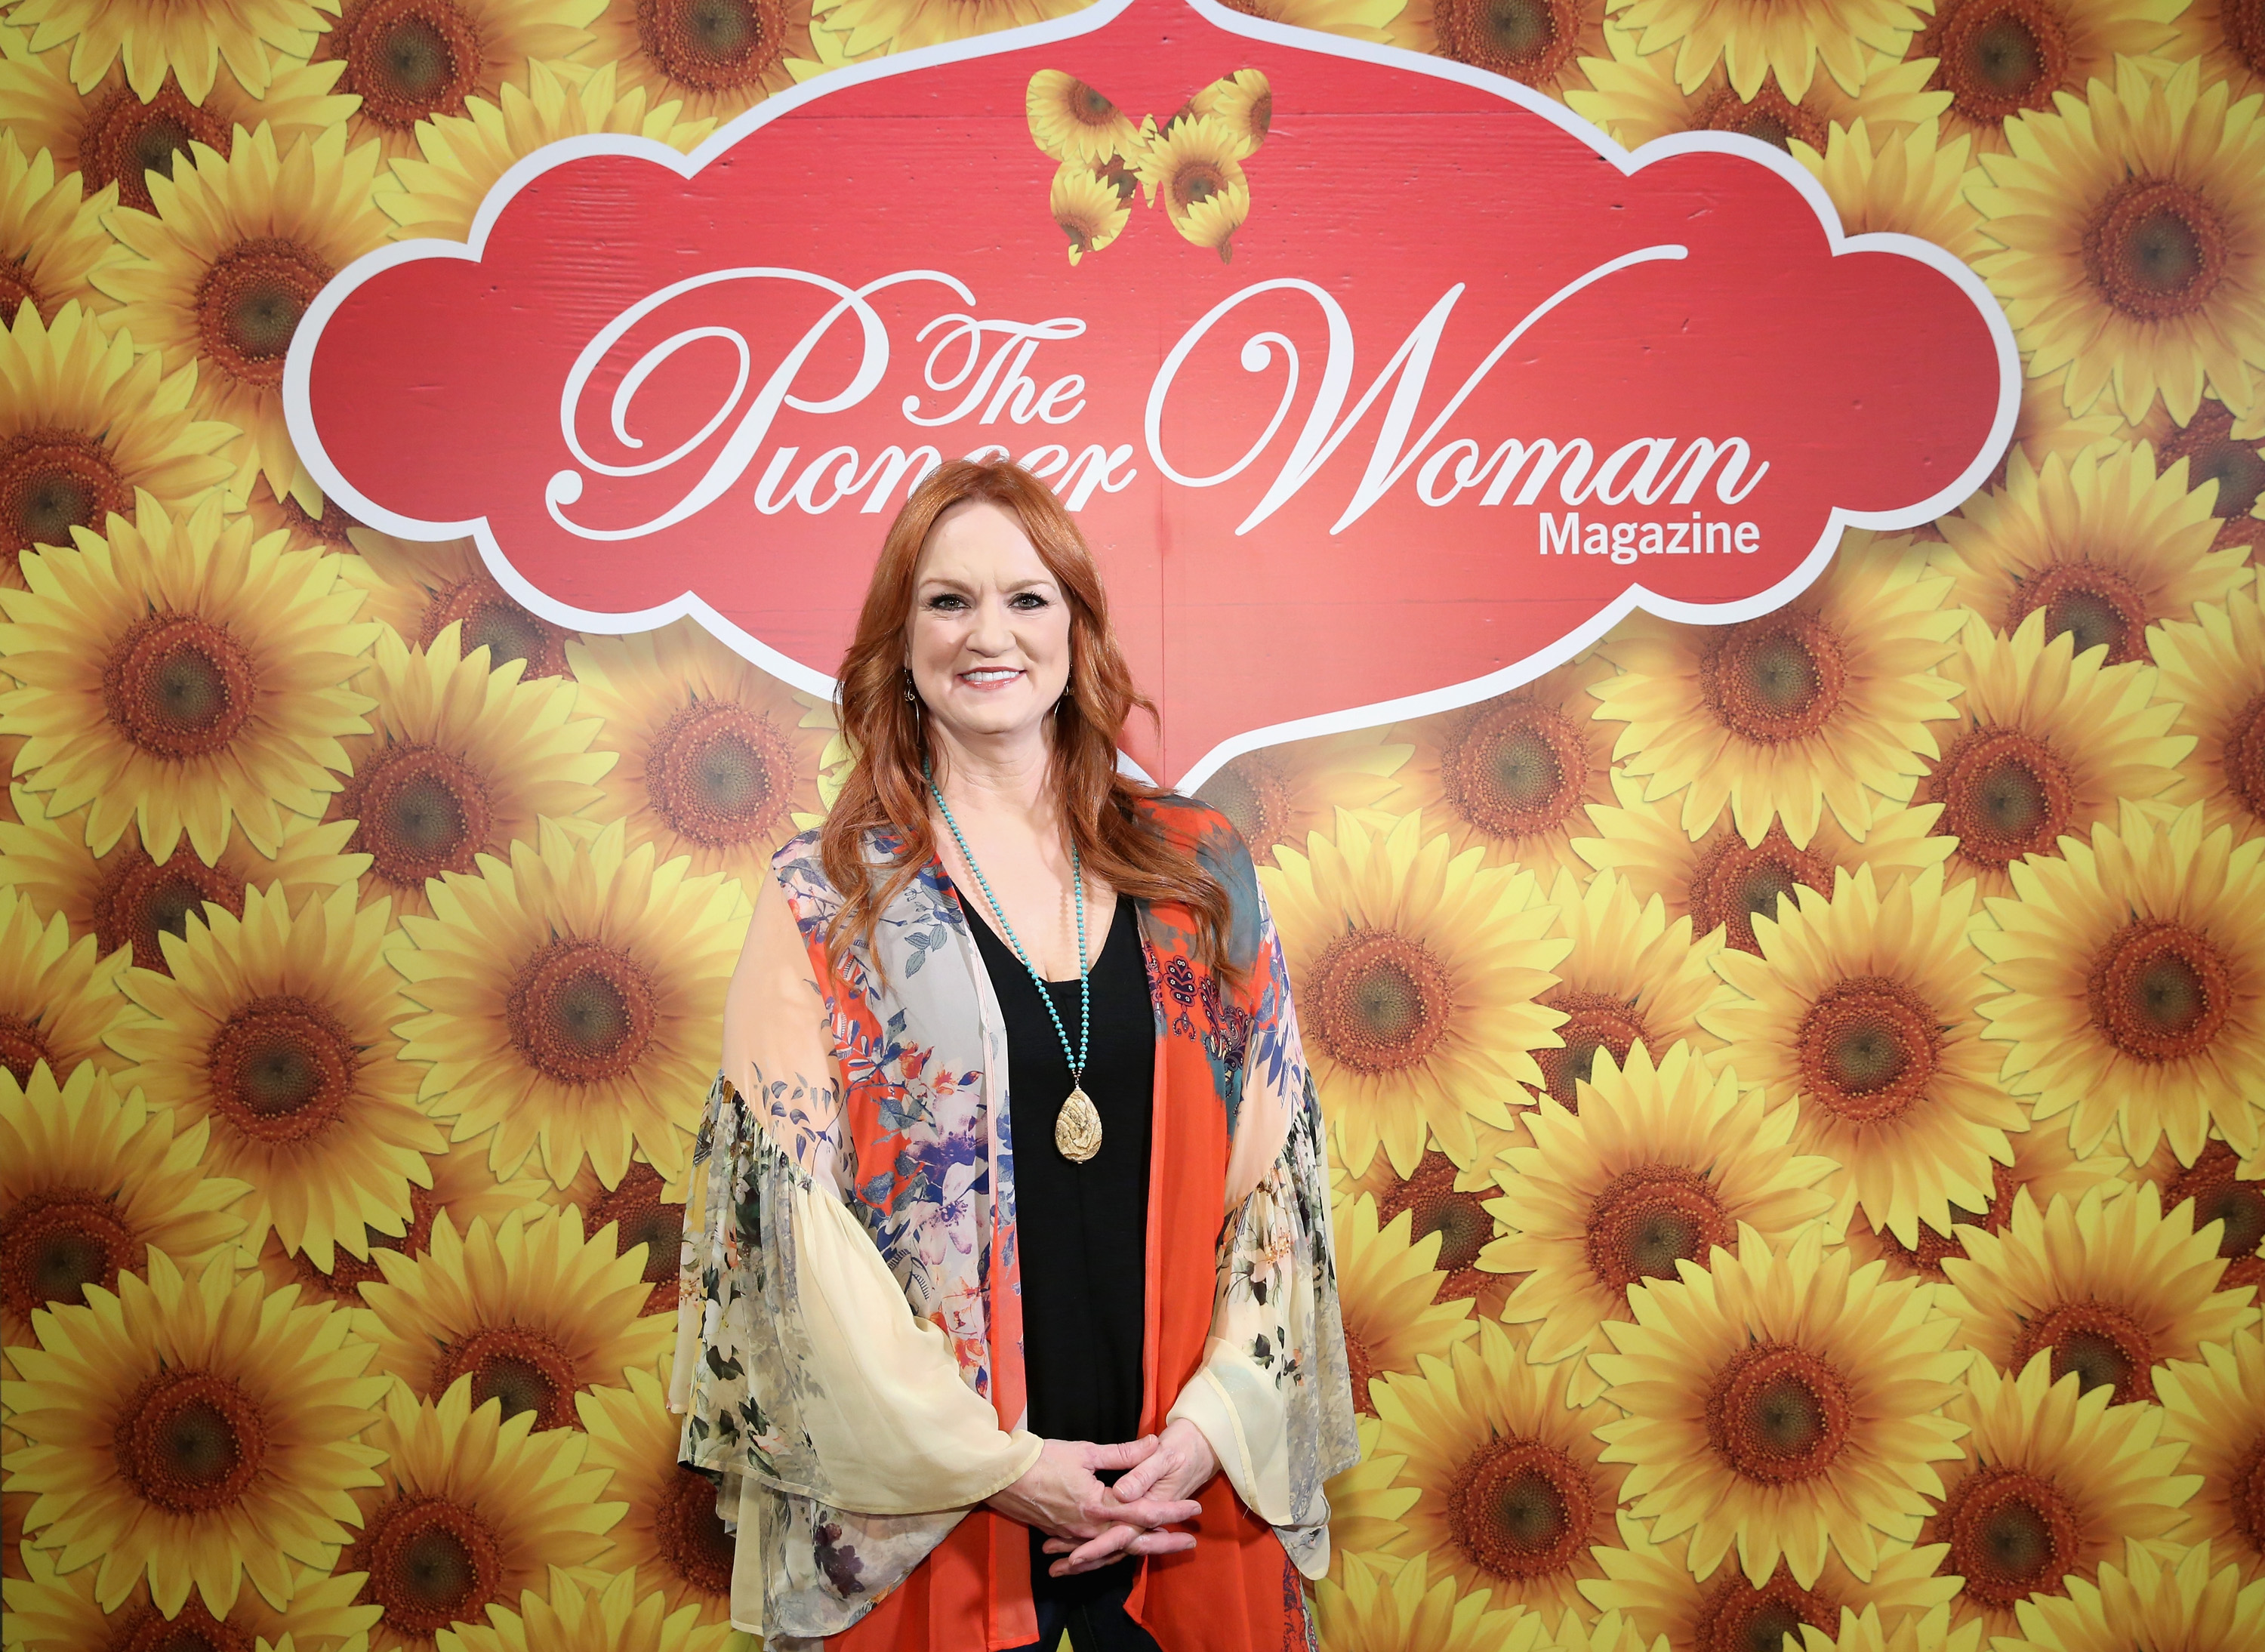 'The Pioneer Woman' star Ree Drummond wears a print blouse in this photograph.